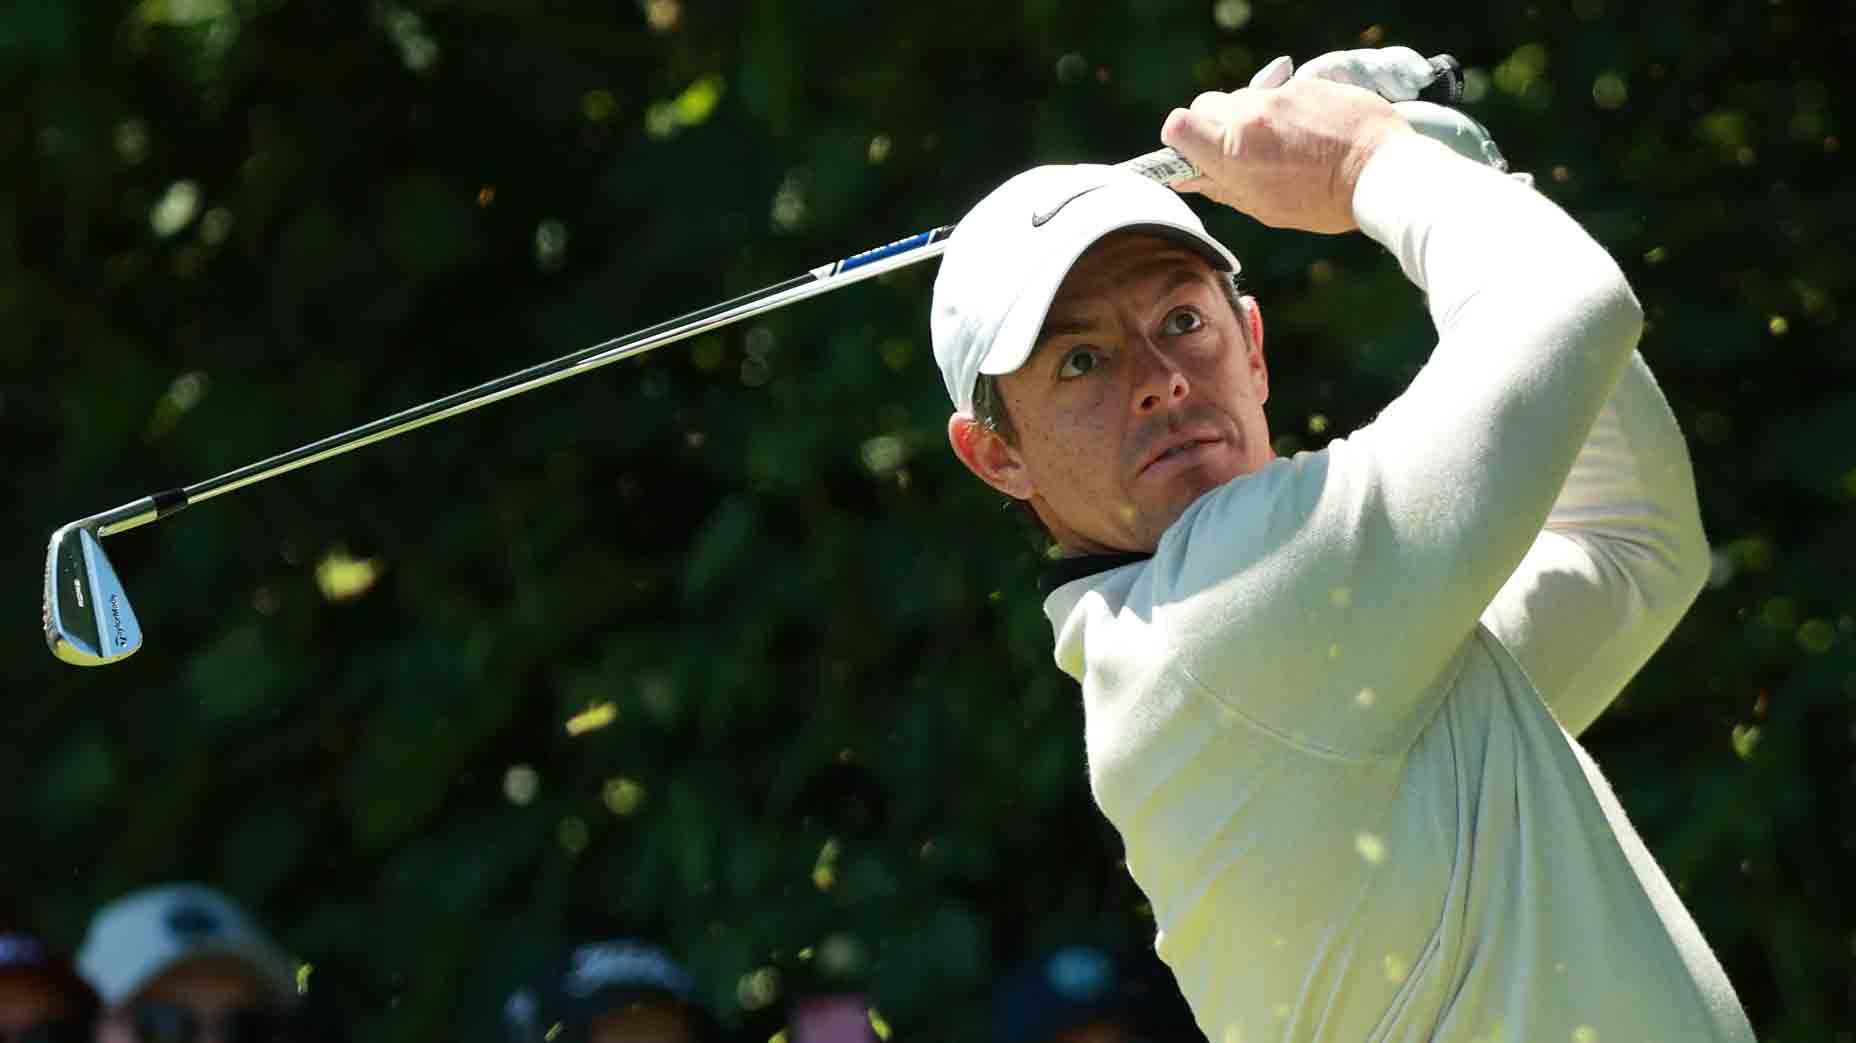 Days after Grayson Murray’s death, Rory McIlroy opens up